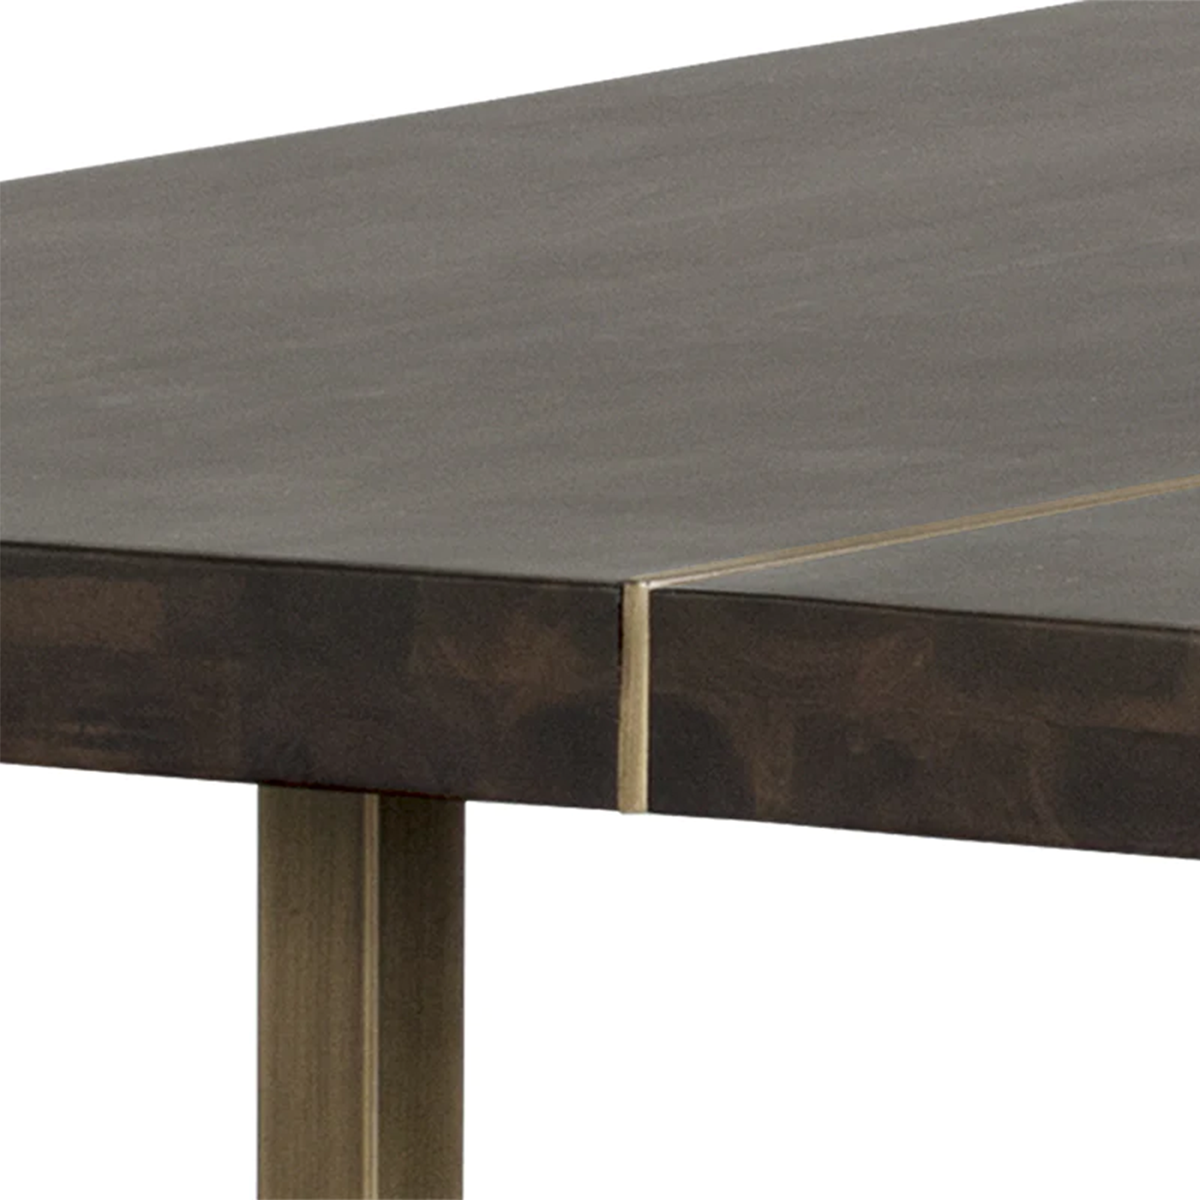 donnelly dining table close image of the material